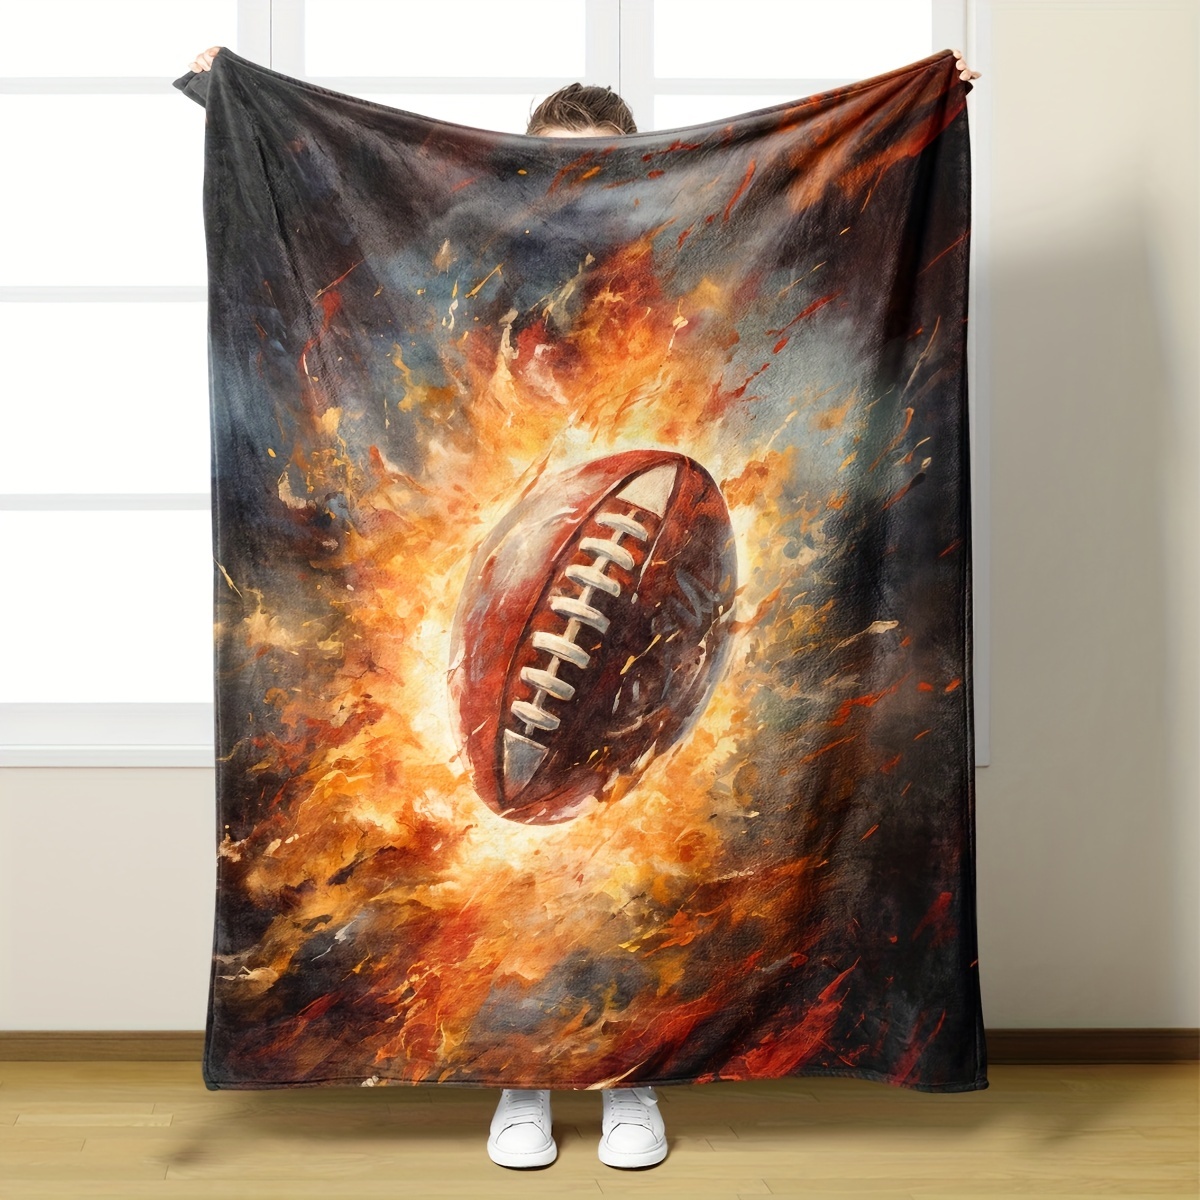 

1pc Flannel Throw Blanket, Rugby In Flames Printed Blanket For All Seasons, Warm Cozy Soft Blanket For Couch Bed Sofa Car Office Camping Travelling